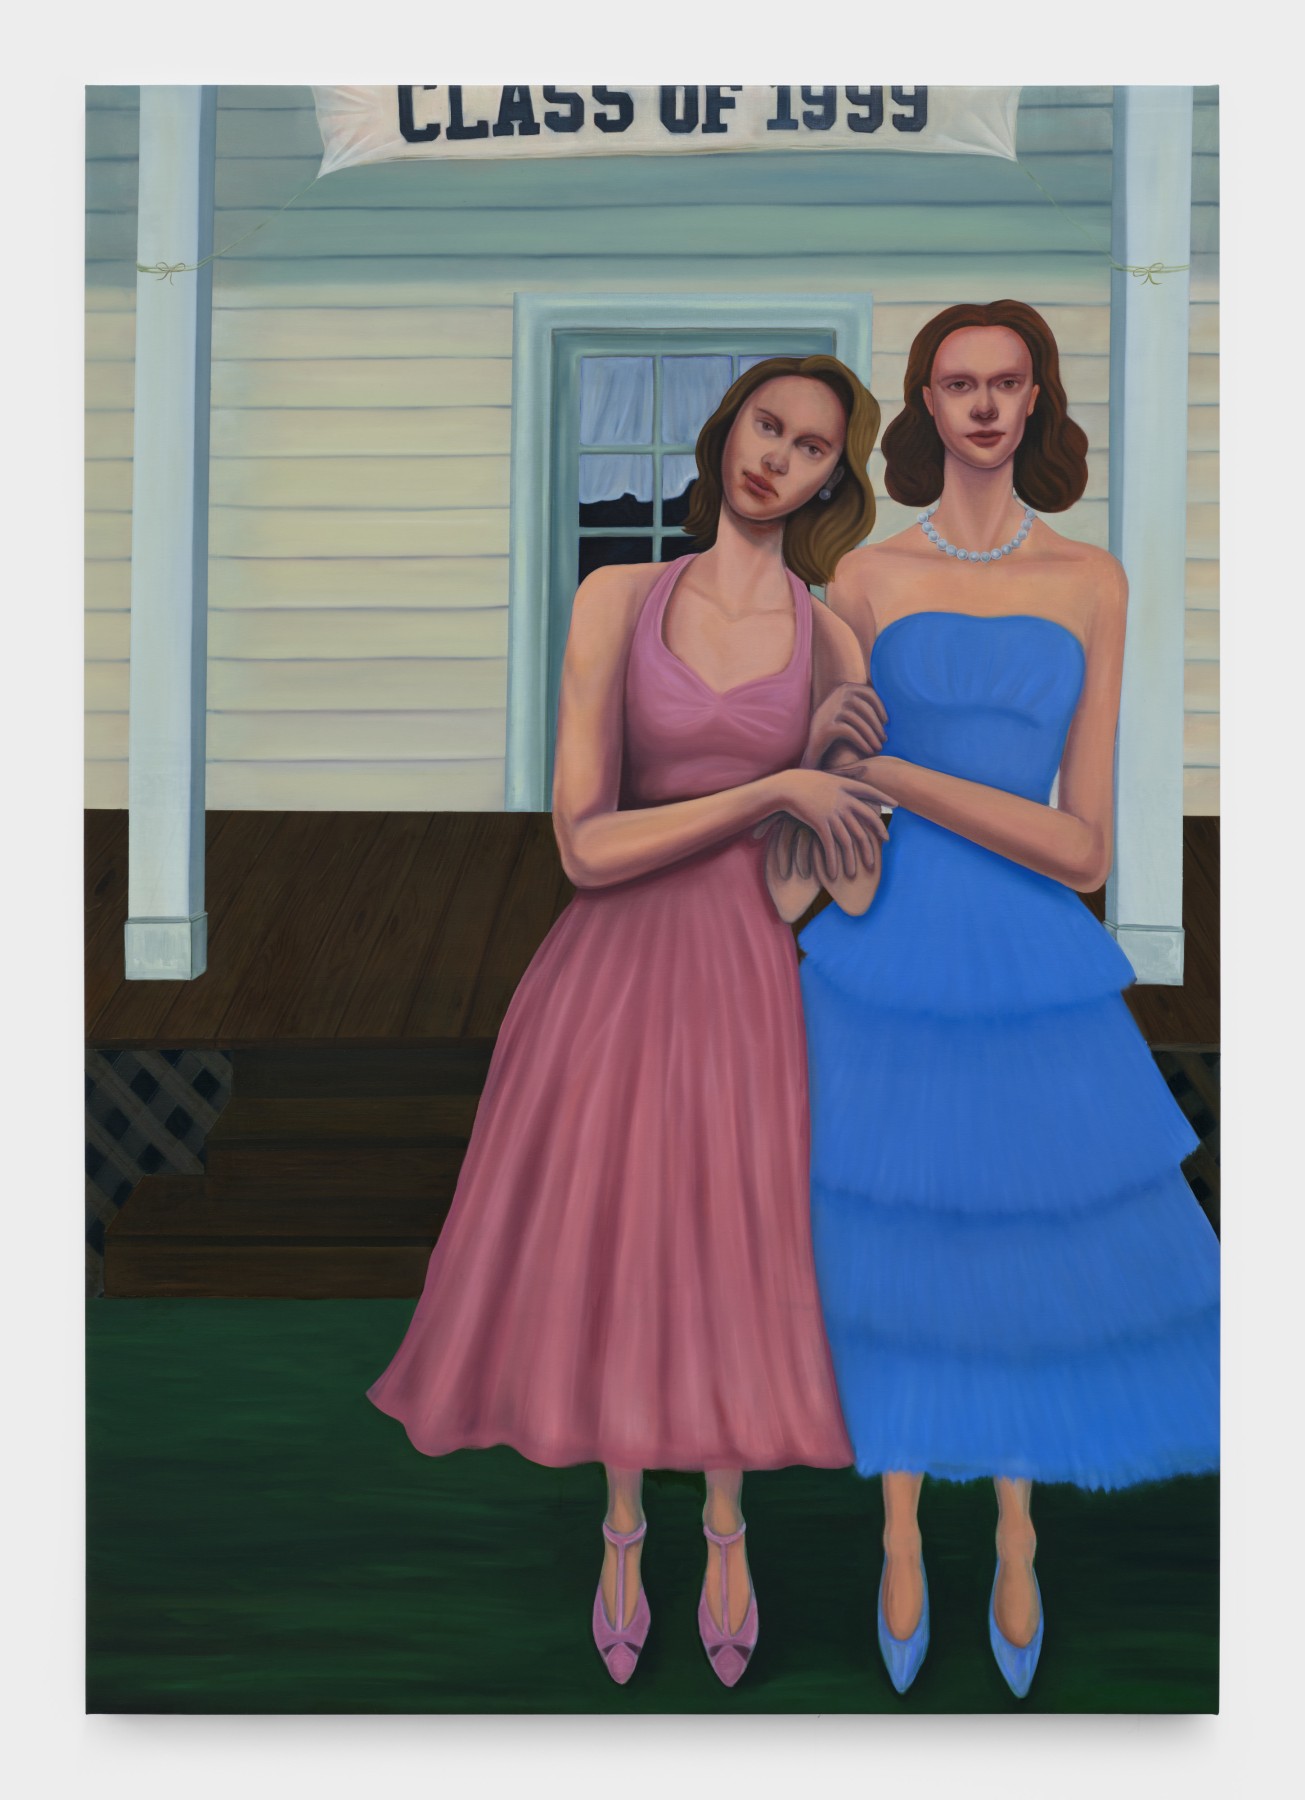 Bambou Gili's artwork "Mary Anne and Wanda Were the Best of Friends". Two young women stand arm in arm in blue and pink ballgowns. 66 x 49 in (167.6 x 124.5 cm), oil on linen, 2022